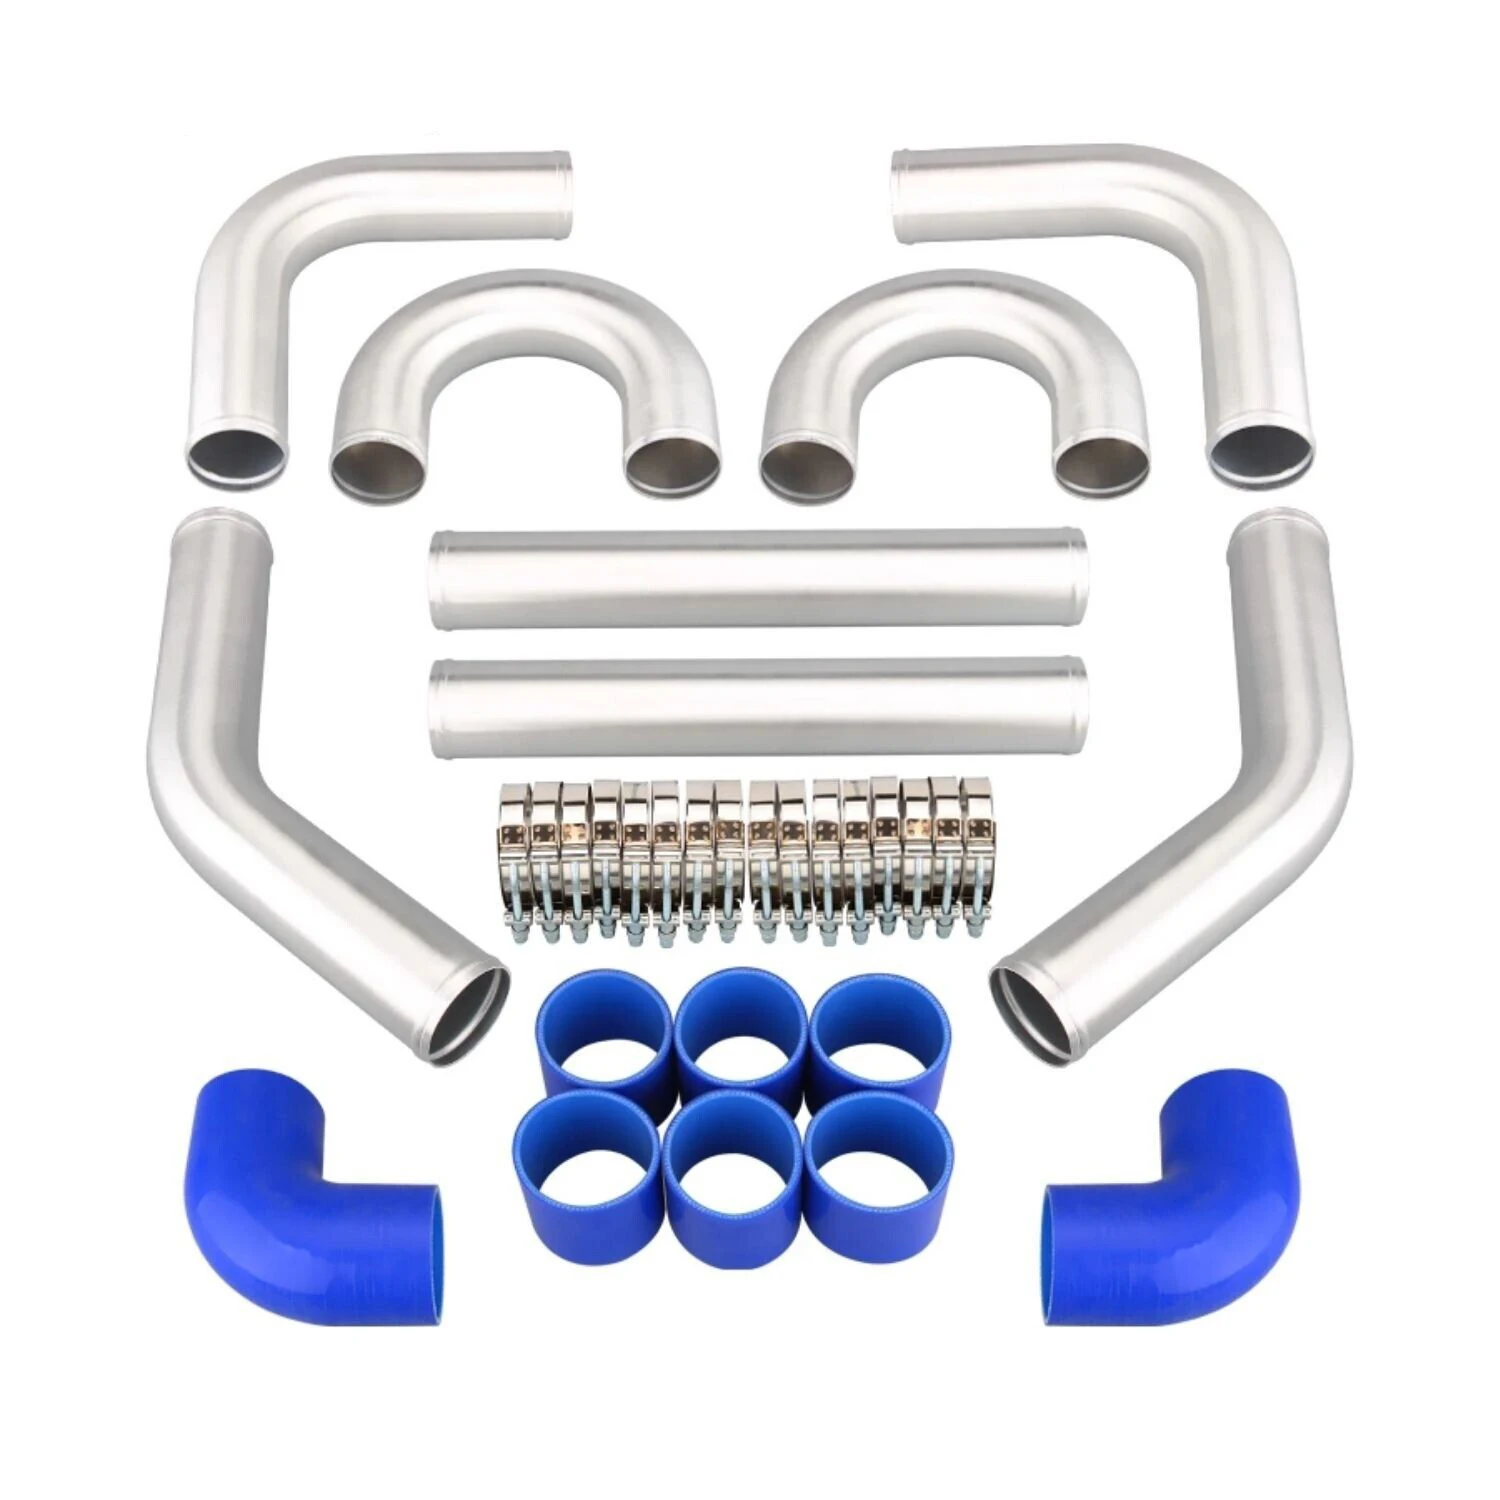 

ALUMINUM TURBO INTERCOOLER PIPING KIT/ PIPES / CLAMP/ COUPLER/ UNIVERSAL 2.5" INCH OD 63 mm/3" INCH OD 76 mm